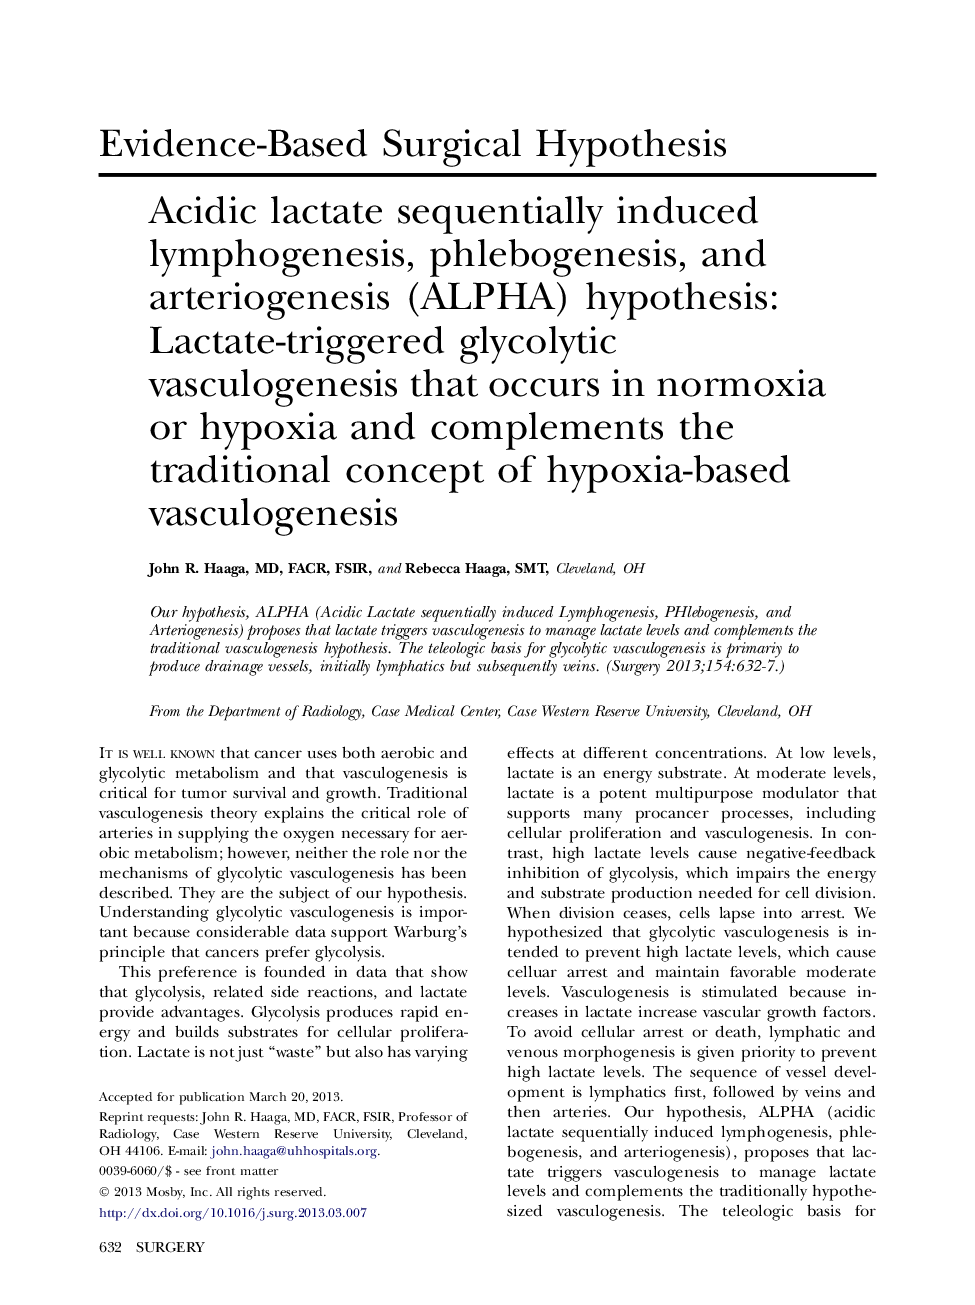 Evidence-Based Surgical HypothesisAcidic lactate sequentially induced lymphogenesis, phlebogenesis, and arteriogenesis (ALPHA) hypothesis: Lactate-triggered glycolytic vasculogenesis that occurs in normoxia or hypoxia and complements the traditional conce